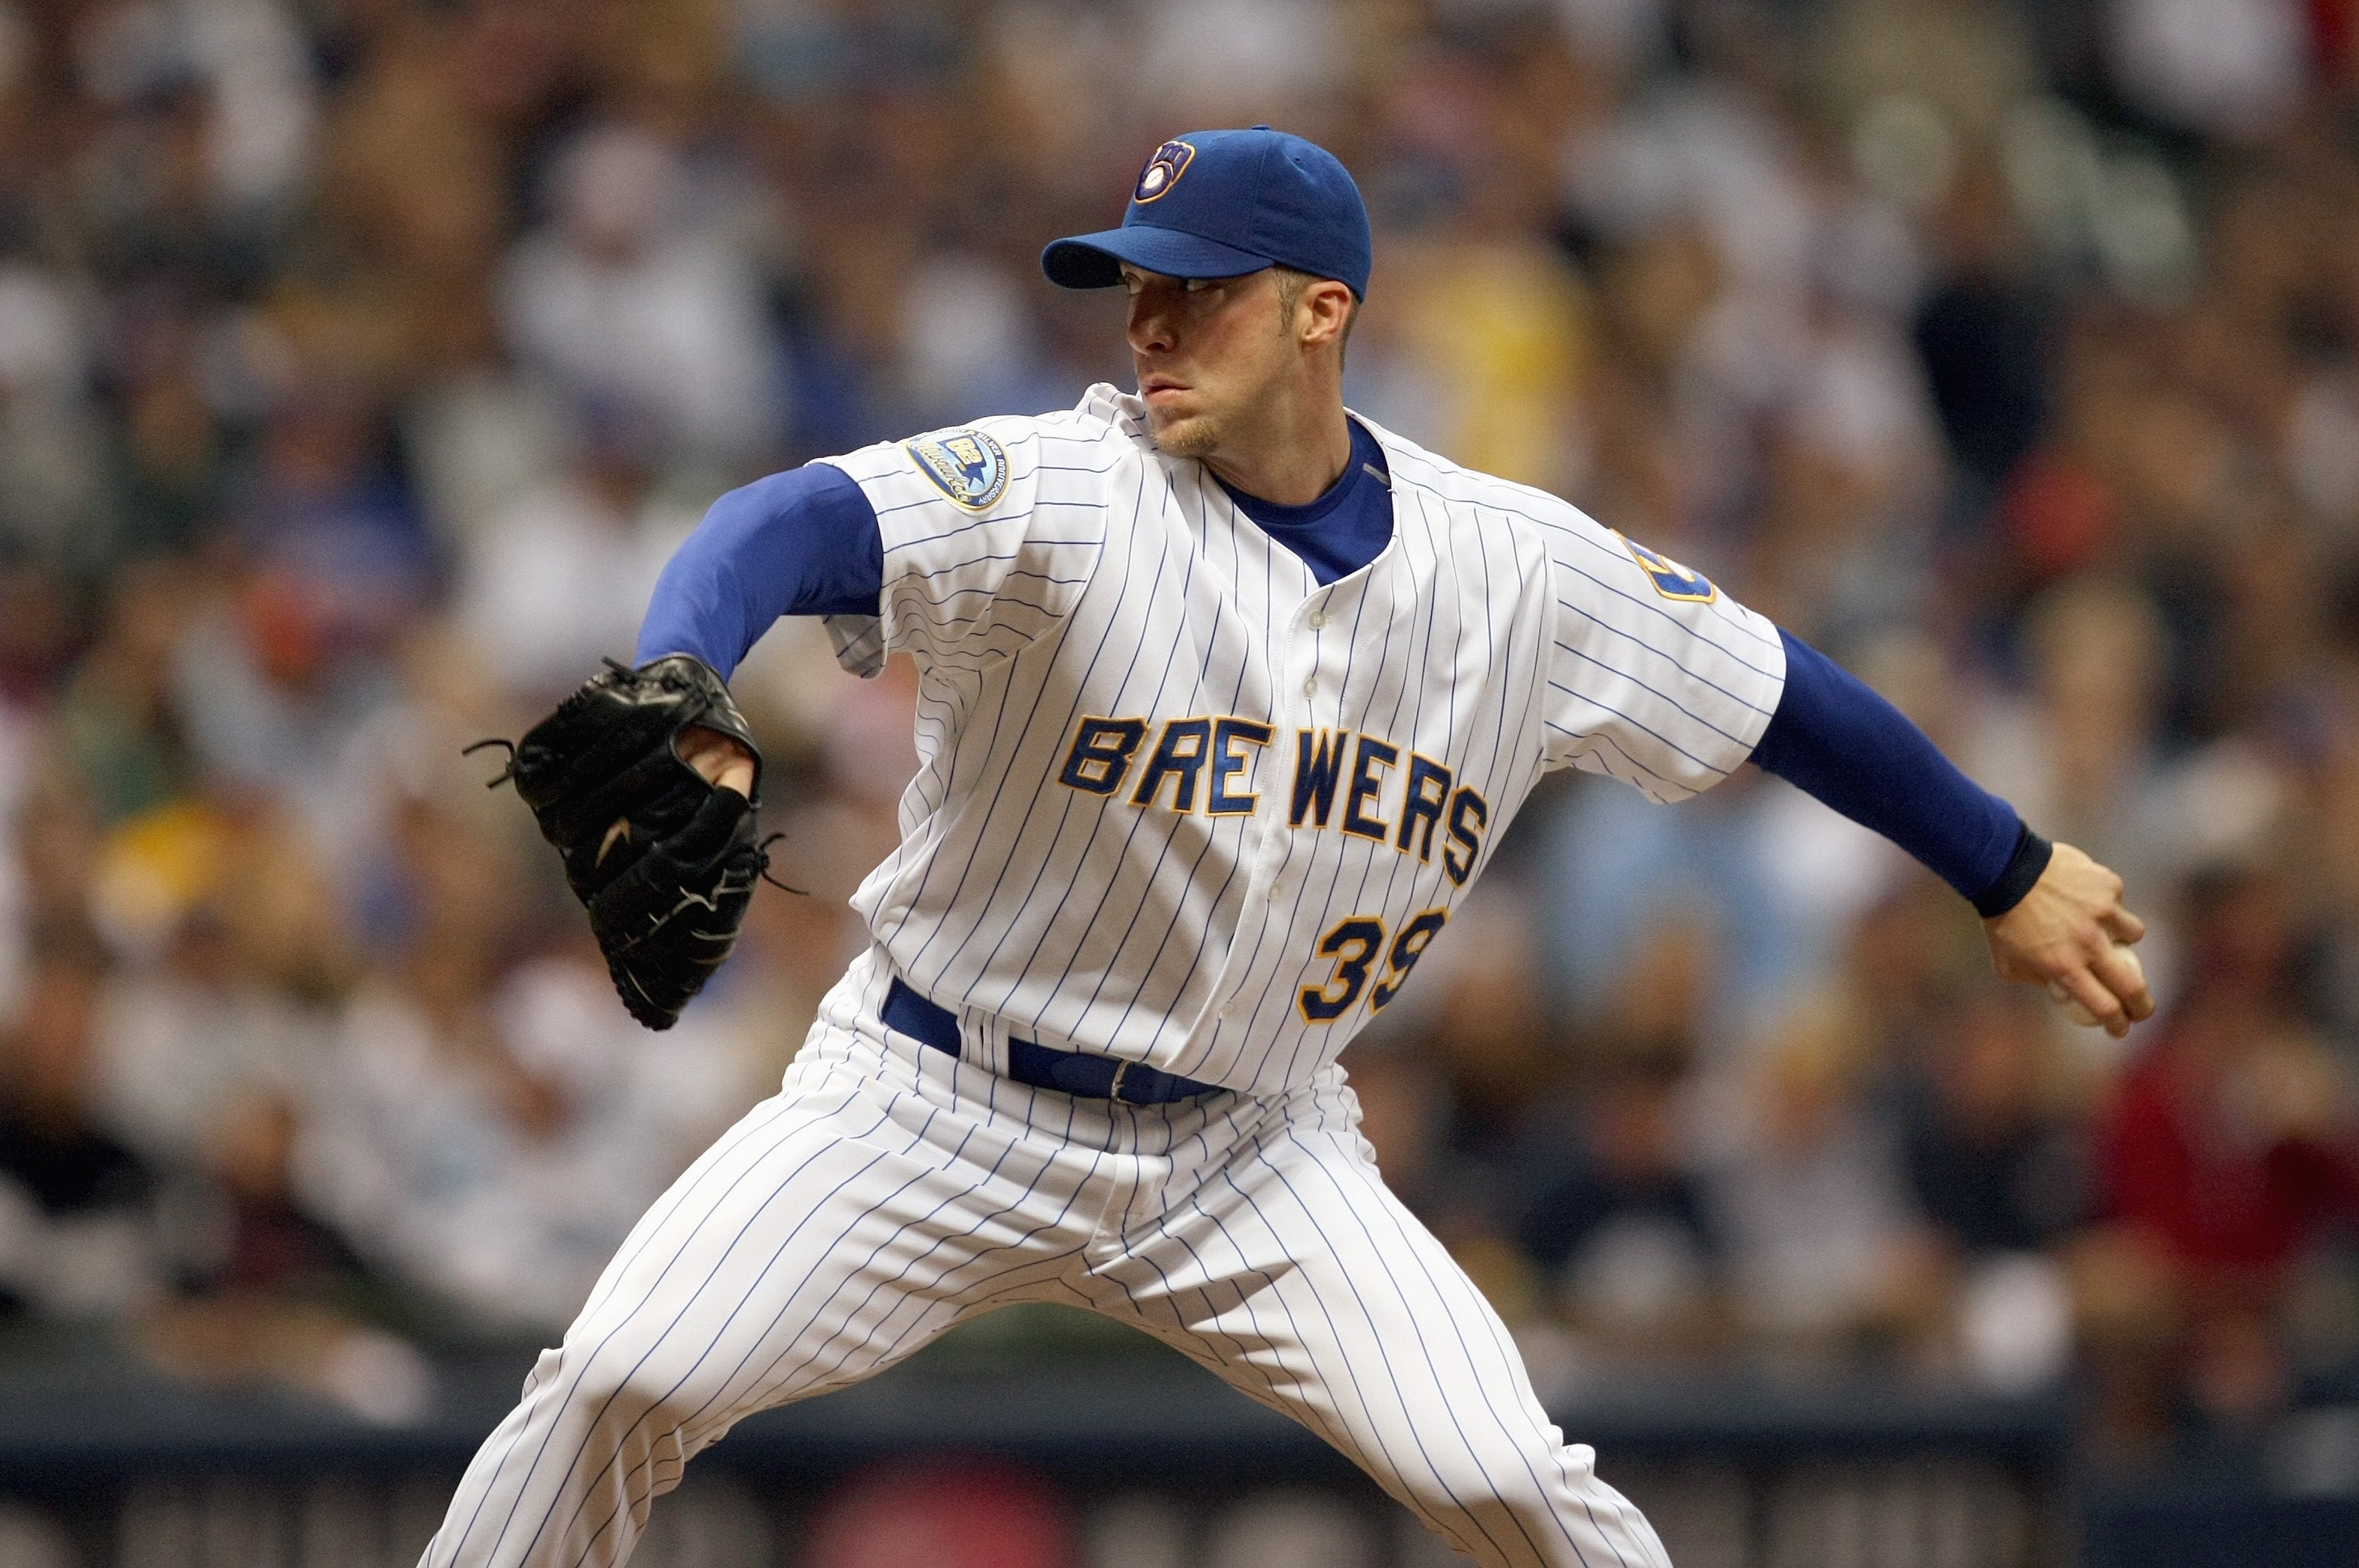 MILWAUKEE - SEPTEMBER 28: Starting pitcher Chris Capuano #39 of the Milwaukee Brewers delivers the ball against the San Diego Padres on September 28, 2007 at Miller Park in Milwaukee, Wisconsin. (Photo by Jonathan Daniel/Getty Images)